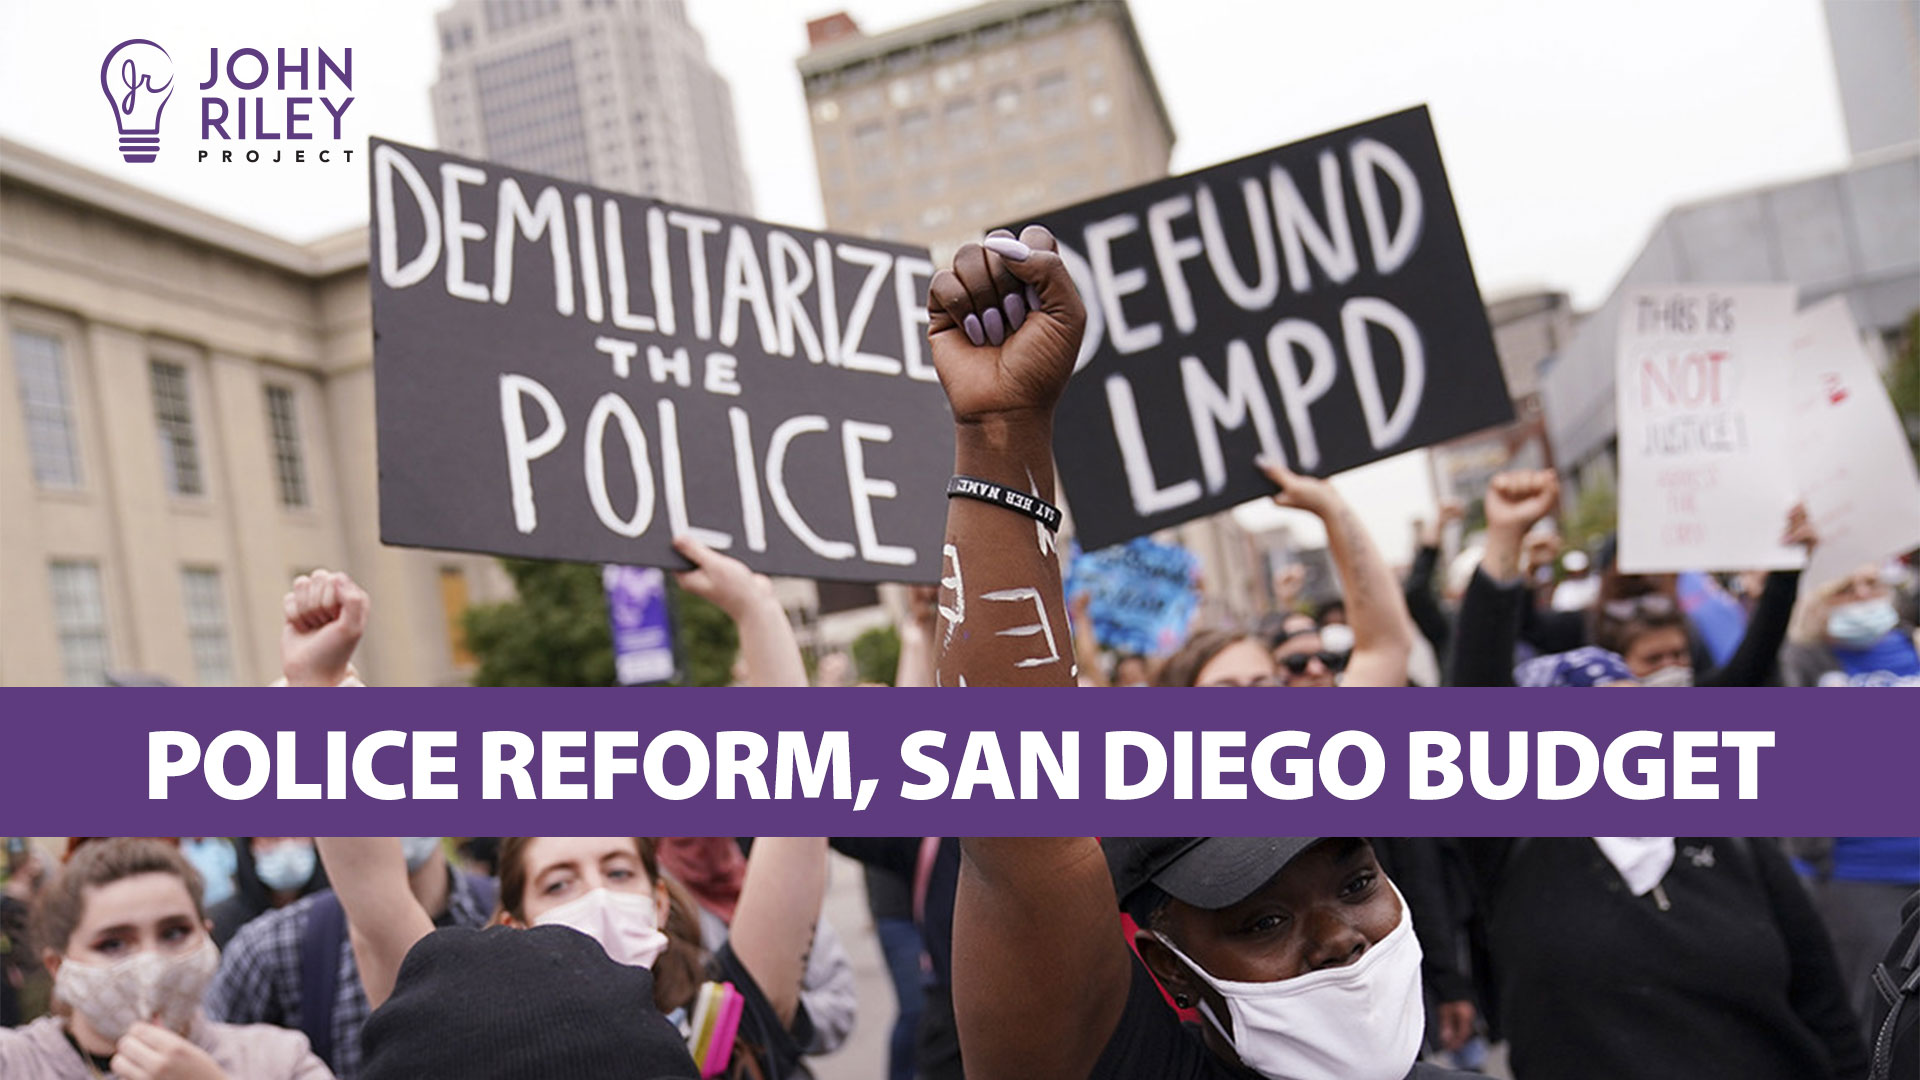 police reform, san diego budget, poway thrift stores, john riley project, JRP0226